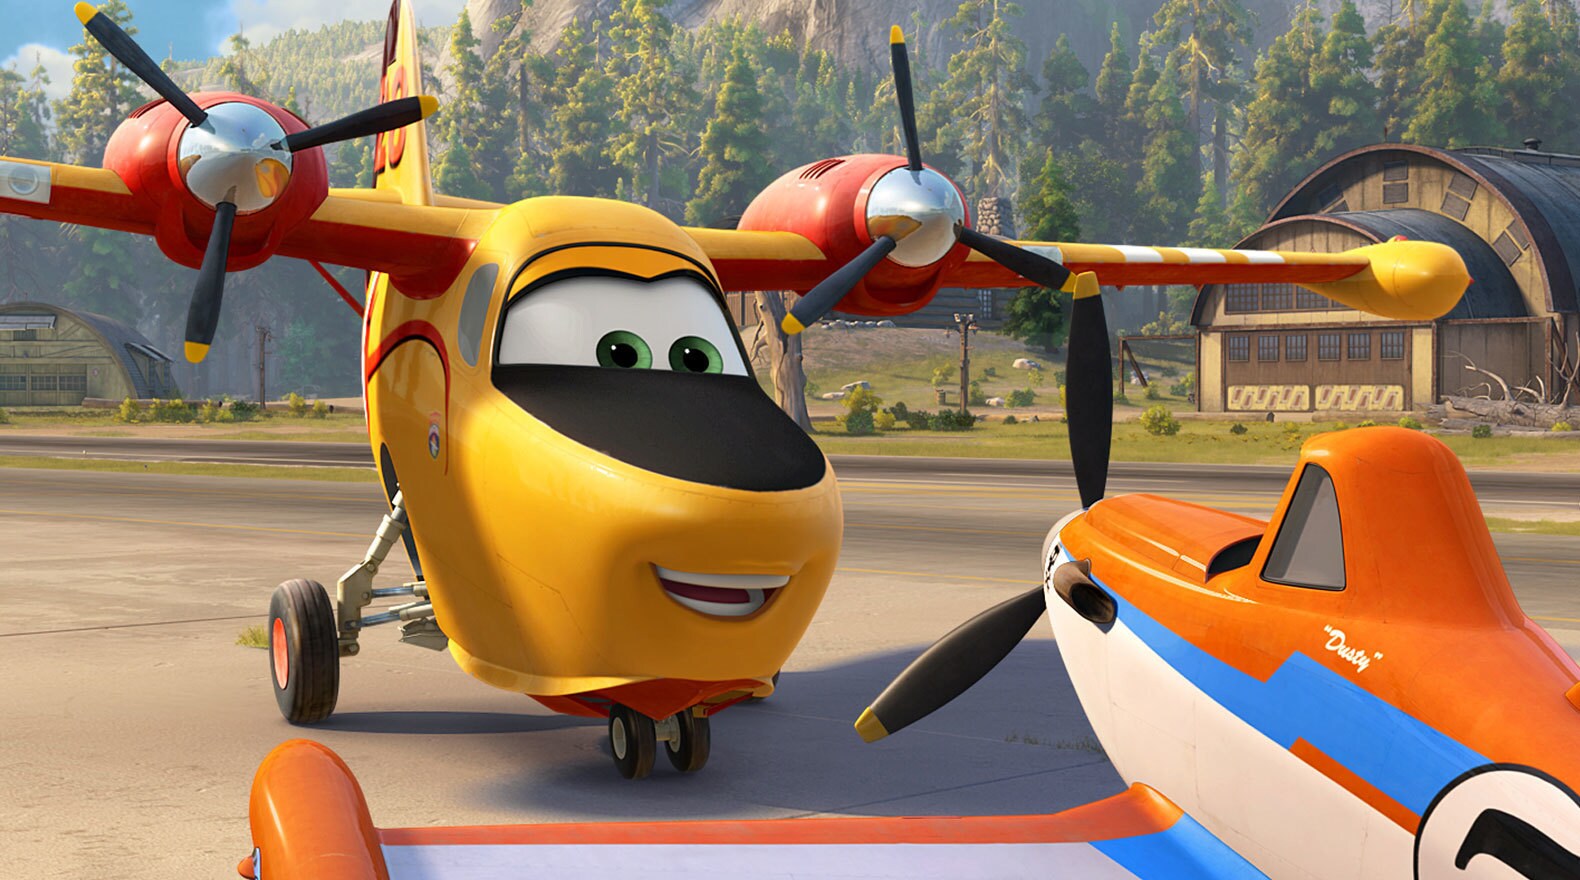 Lil Dipper (Julie Bowen) and Dusty (Dane Cook) in "Planes: Fire & Rescue."